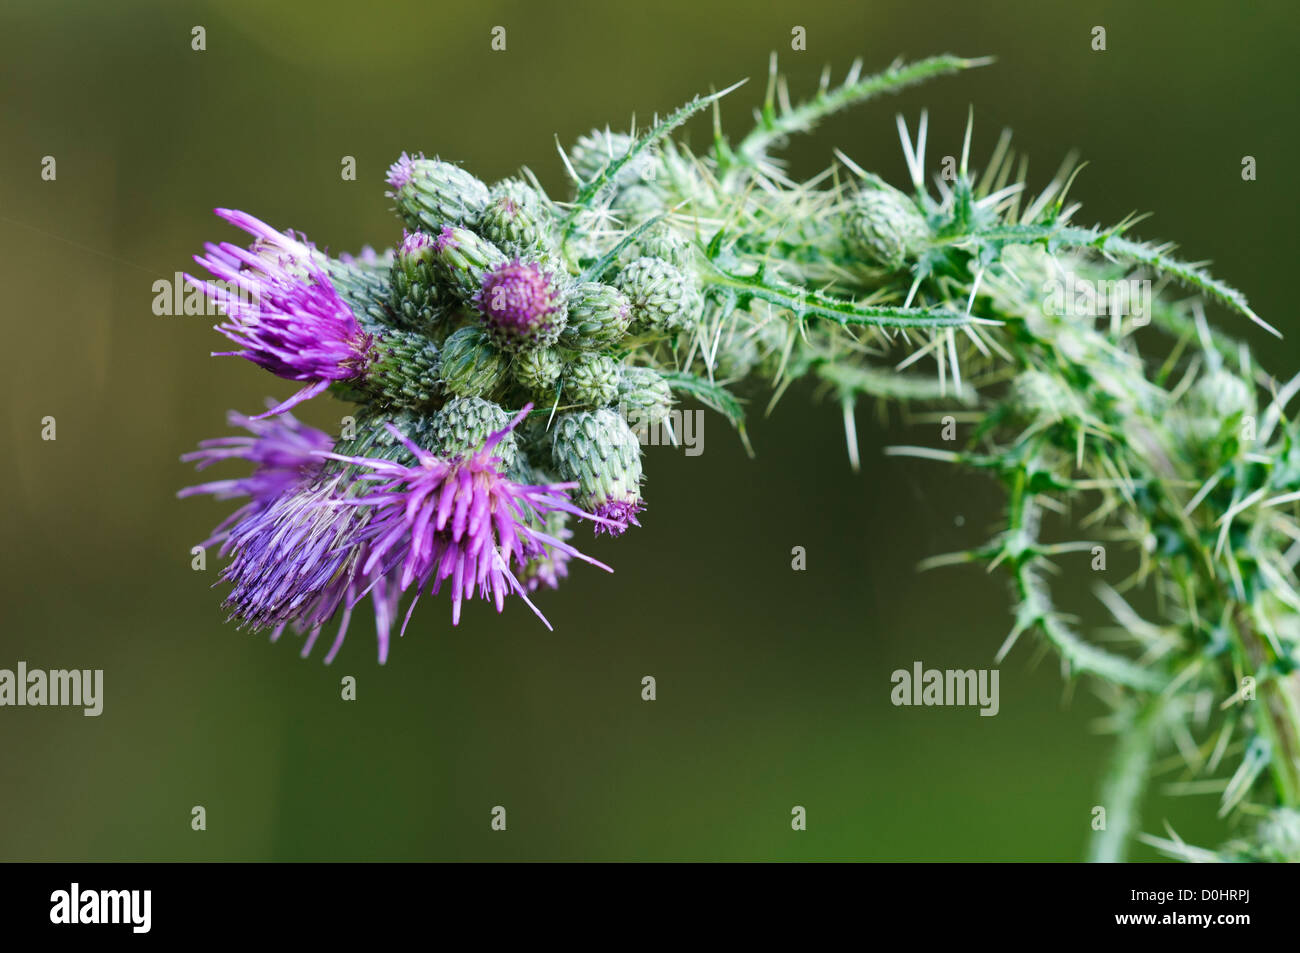 A welted thistle (Carduus crispus) weighed down by flower buds at Southwater Woods, West Sussex. july. Stock Photo